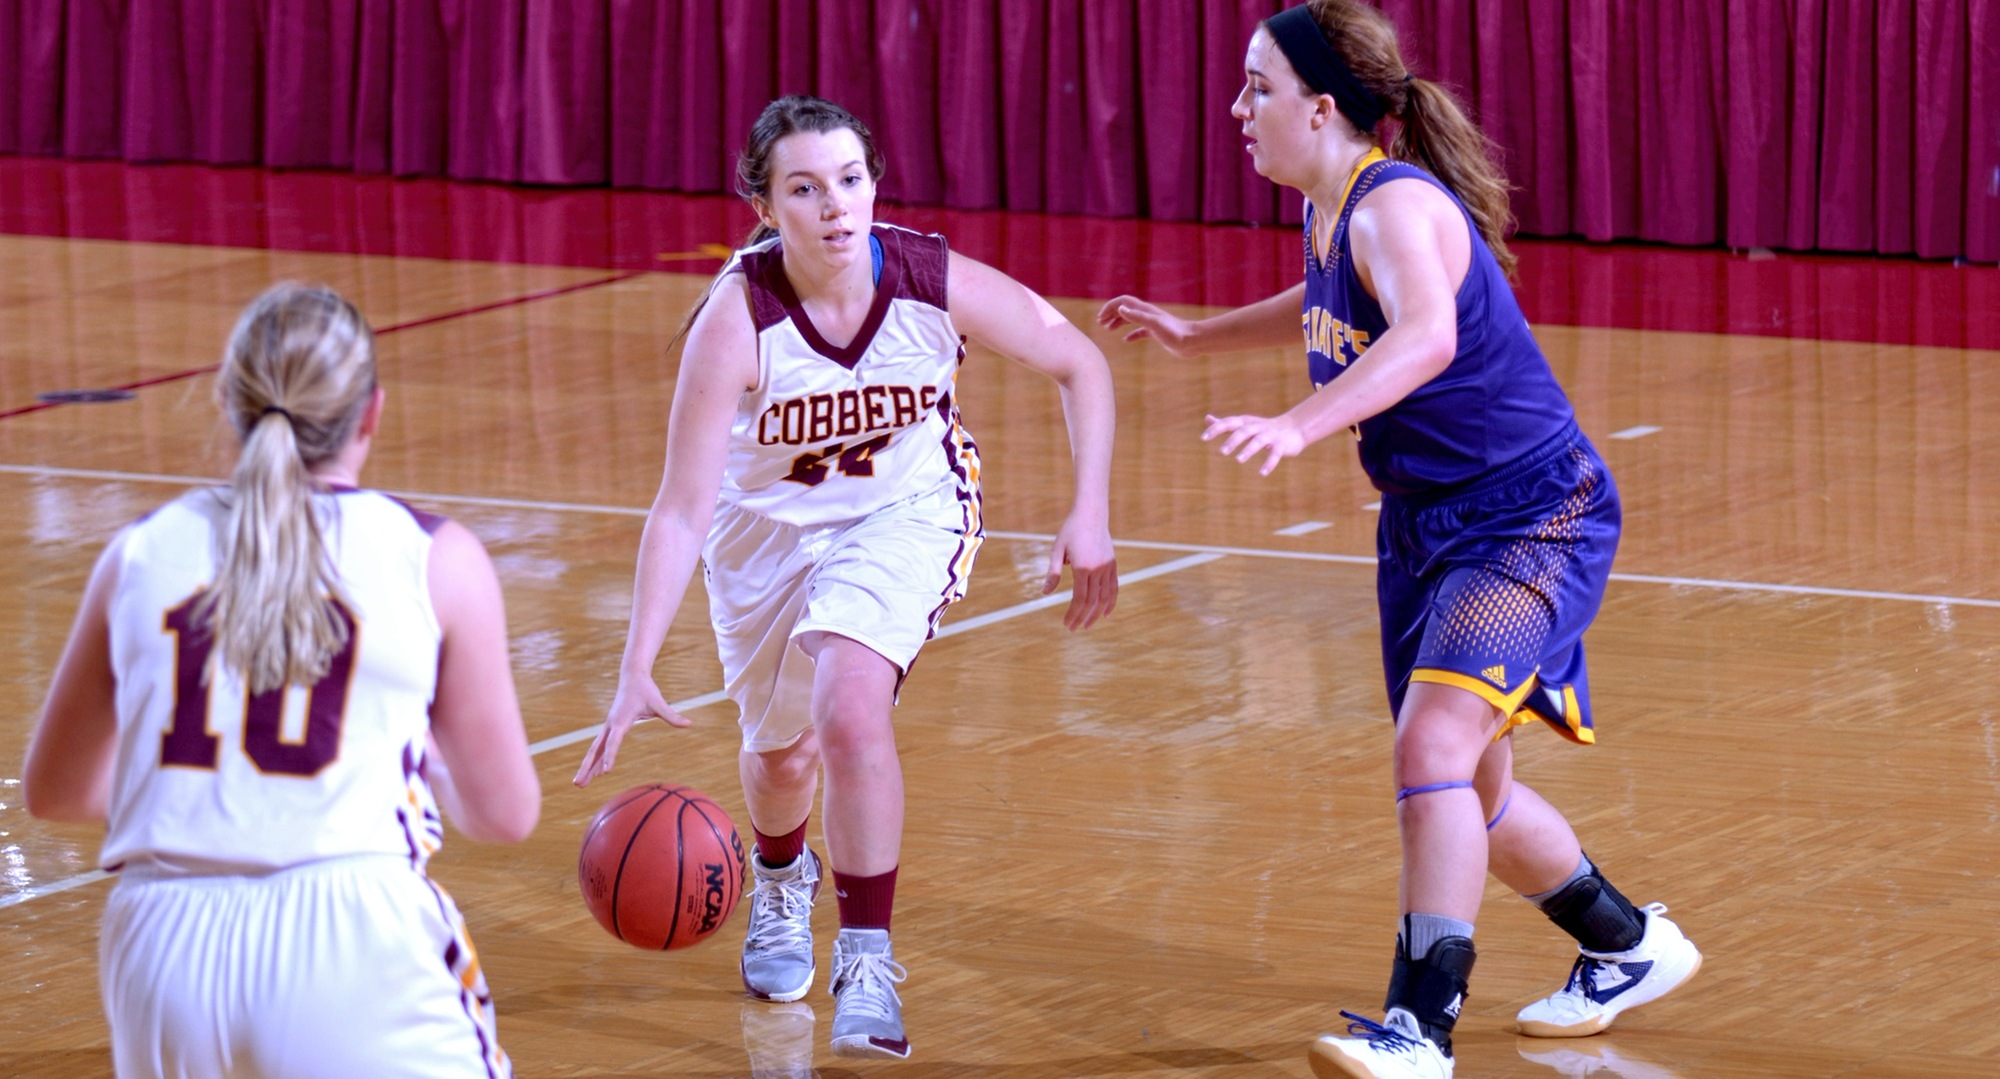 Junior Cassidy Rahman had a career-high 10 rebounds in the Cobbers' game at St. Catherine.